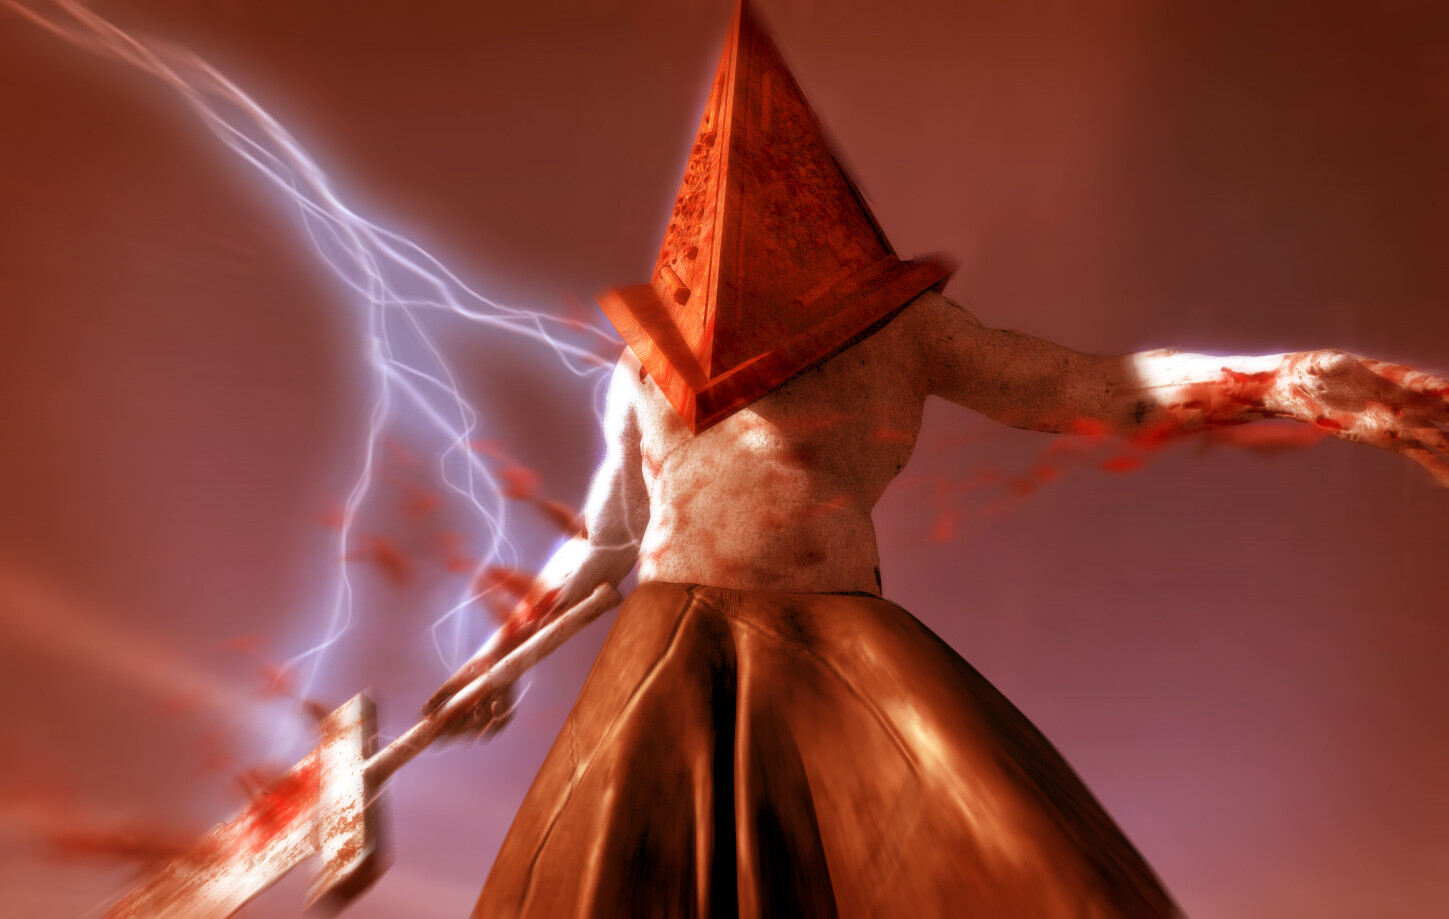 Pyramid Head without helmet by MornaAinu on DeviantArt